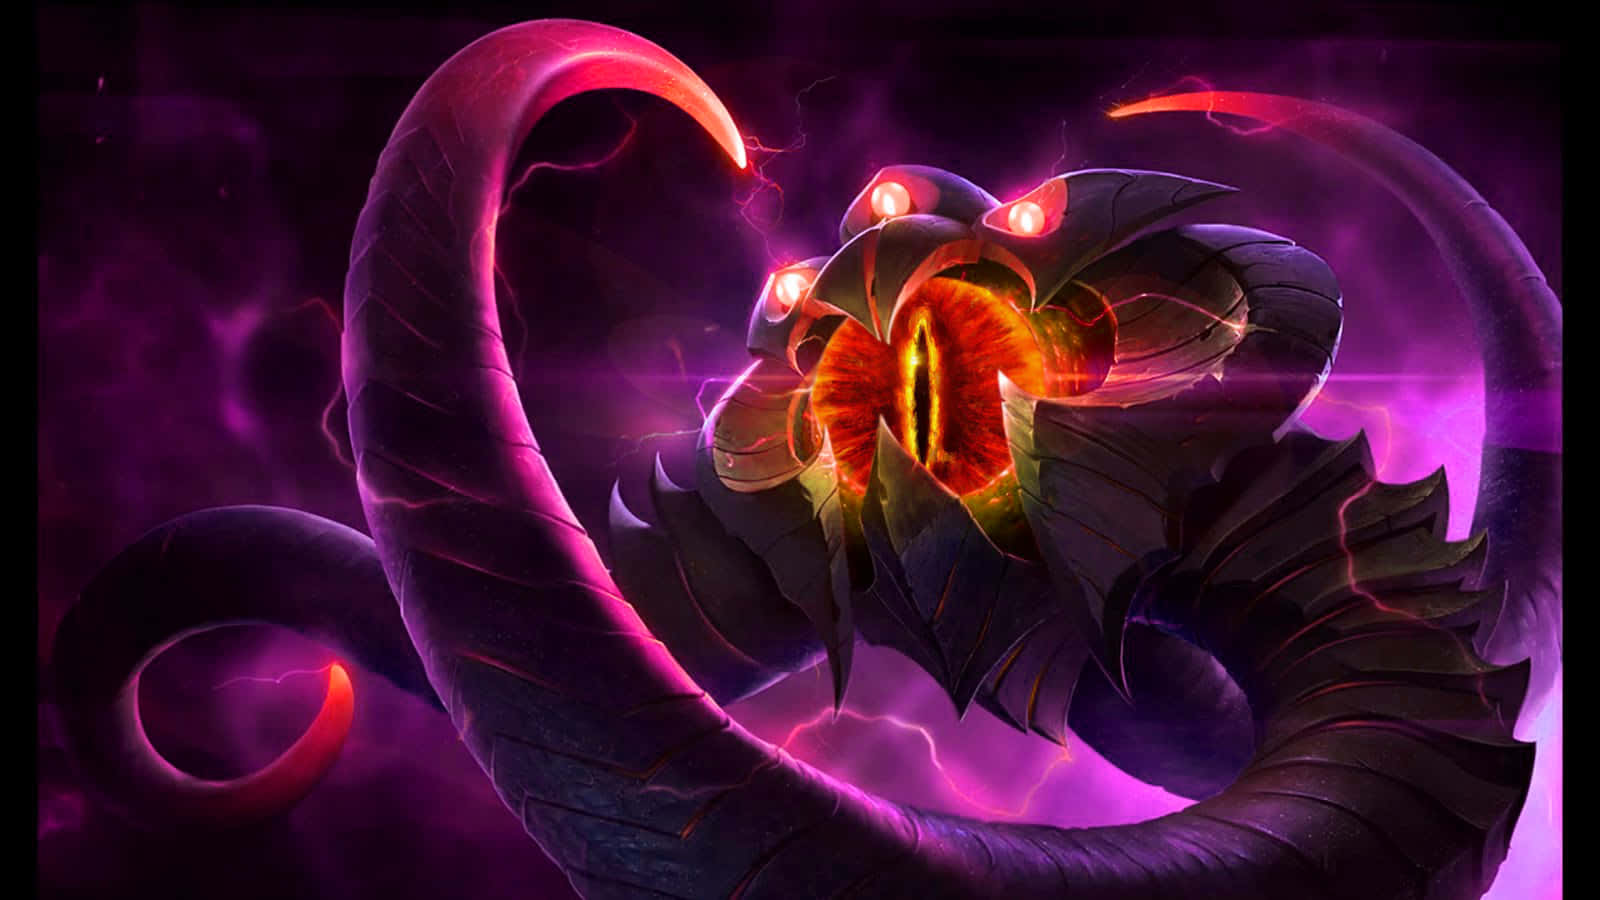 A Purple Monster With Glowing Eyes Wallpaper